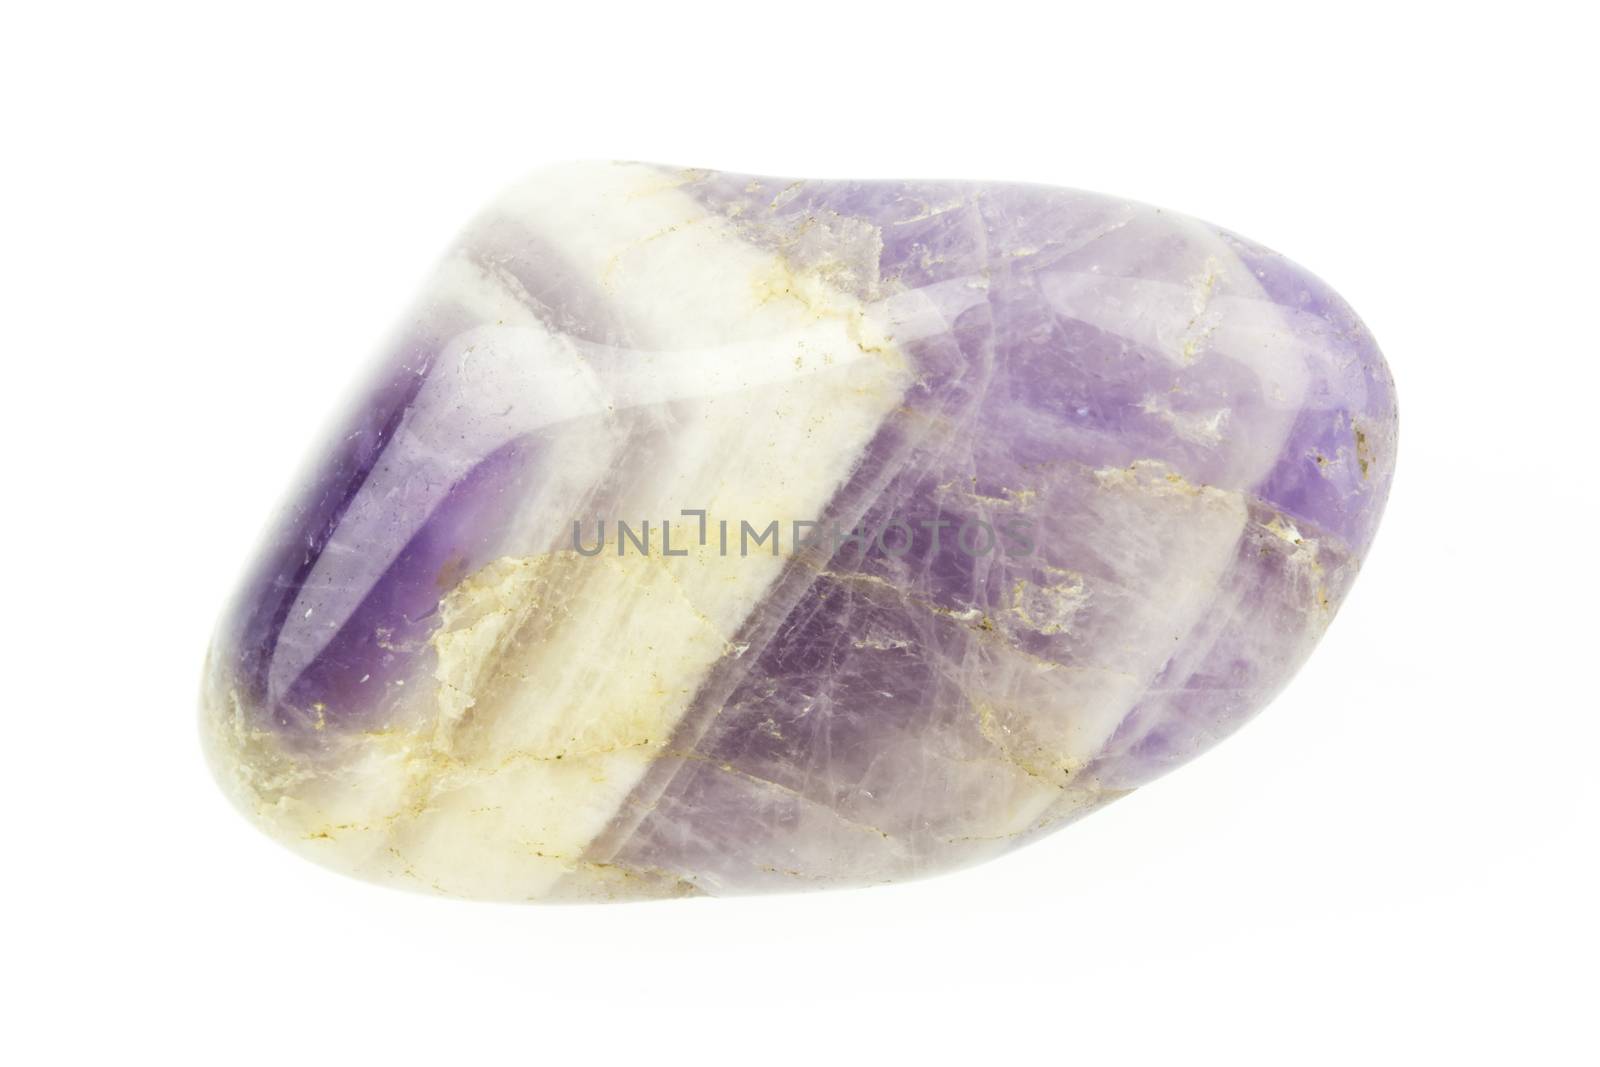 Amethyst is precious of the quartz crystals and highly prized as a gemstone.